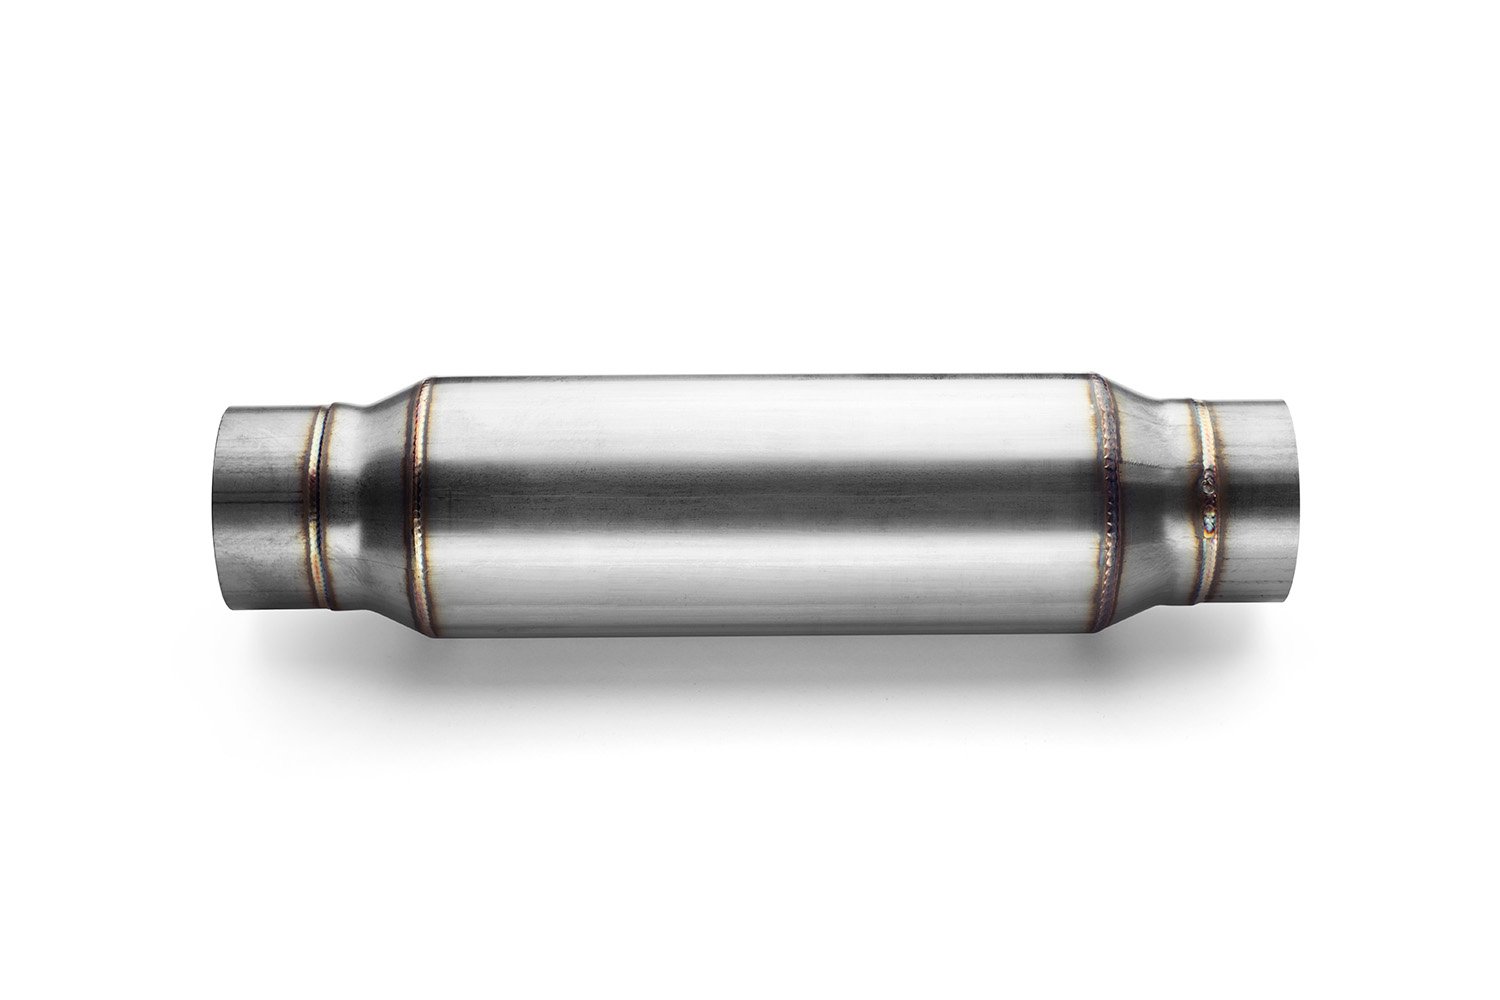 TR-Series Resonator Muffler, Inlet/Outlet: 3 in., Overall Length: 16 in. [Mirror Polished Finish]